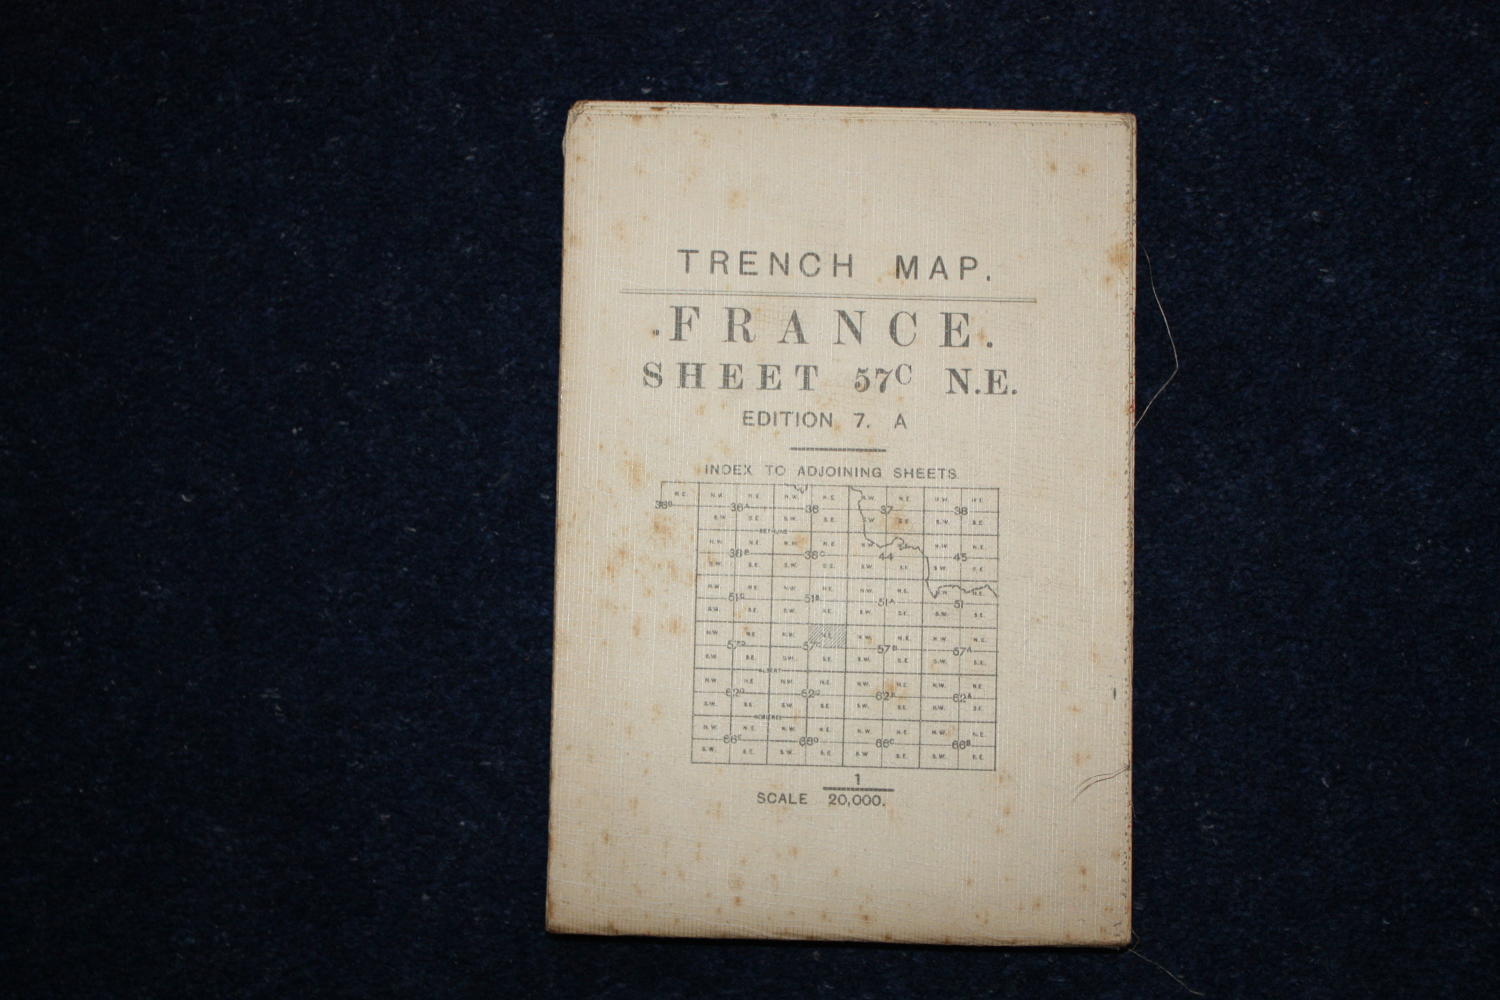 WW1 British Army Trench Map Havrincourt 20th September 1917.